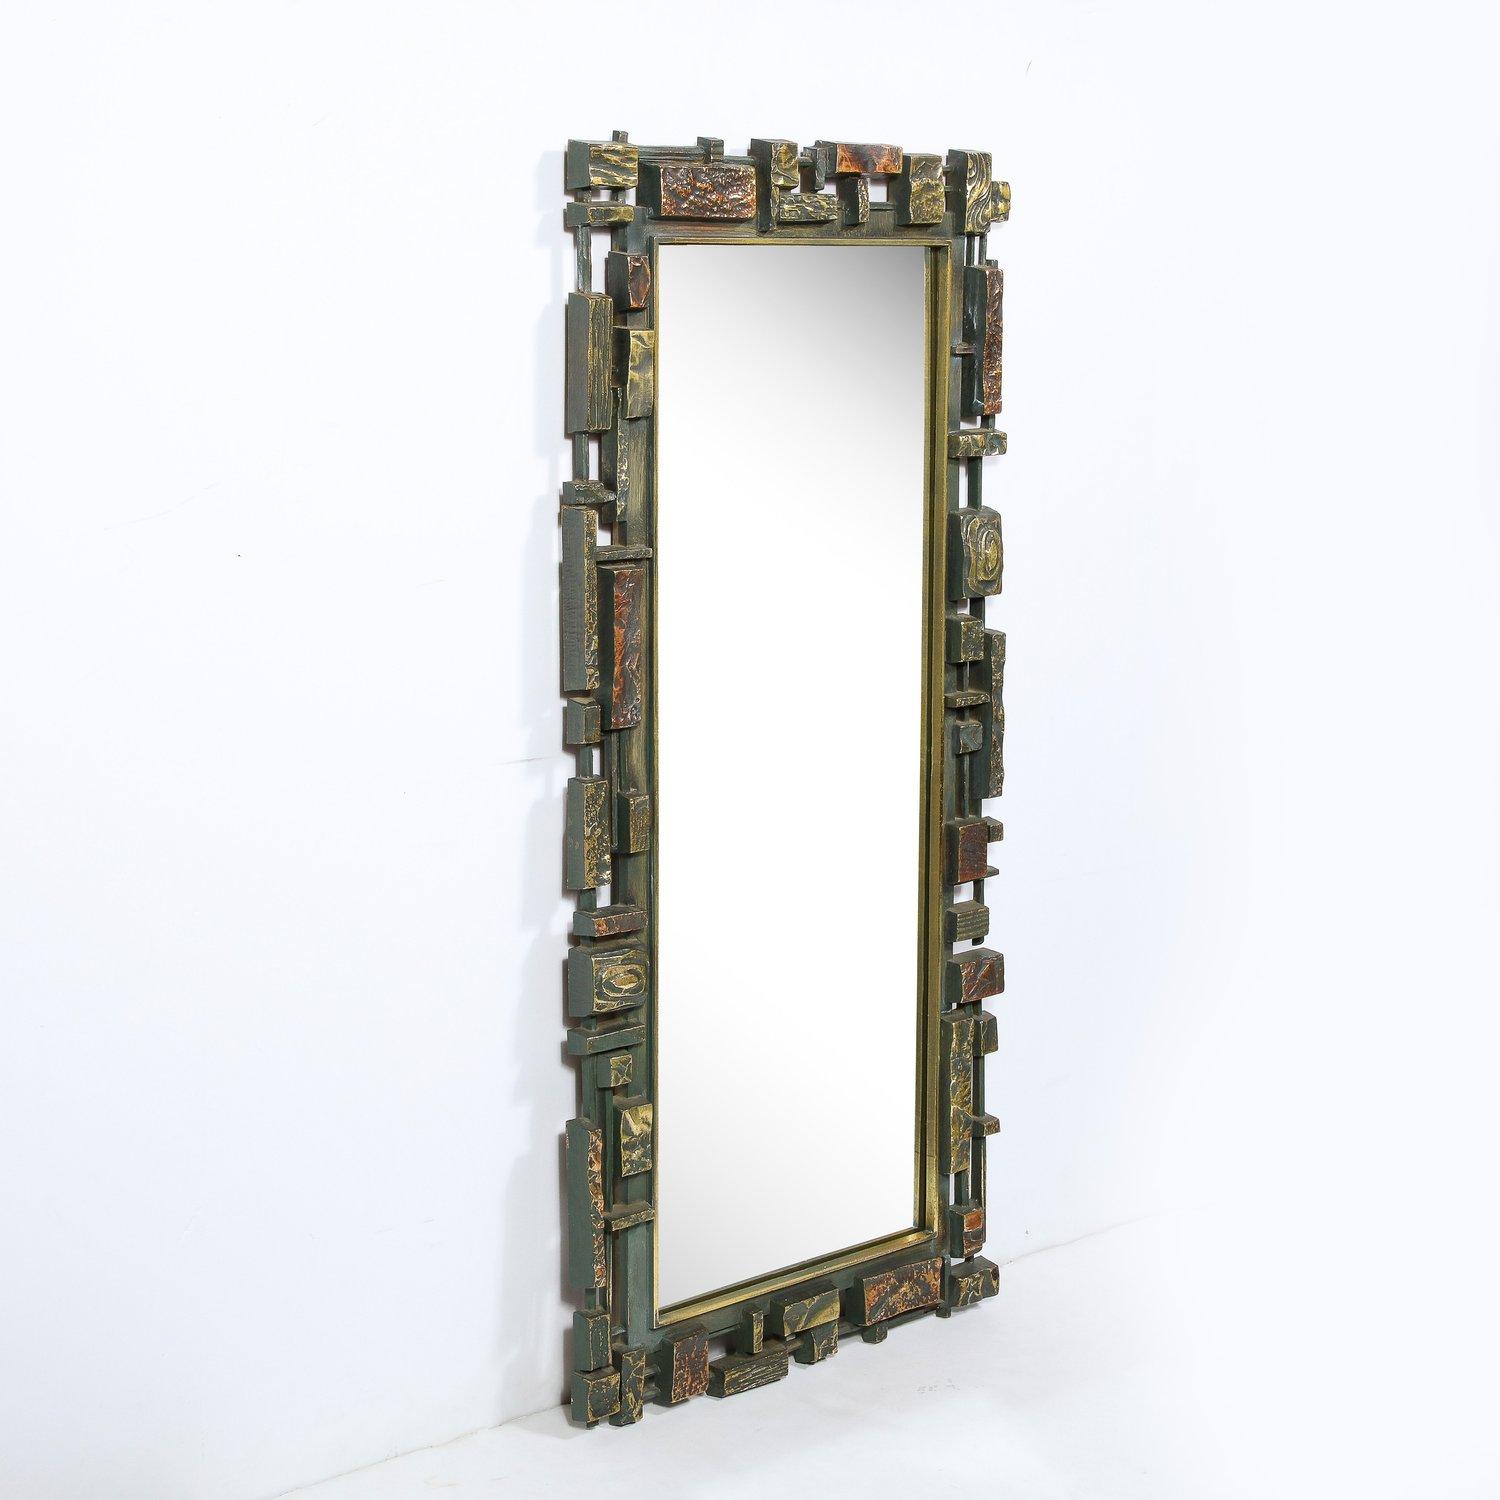 This graphic and sophisticated Mid-Century Modern mirror was realized in the United States circa 1970. It features a rectangular plain mirror center surrounded by an injection moulded thick resin plastic in a finish of bronze and copper. The